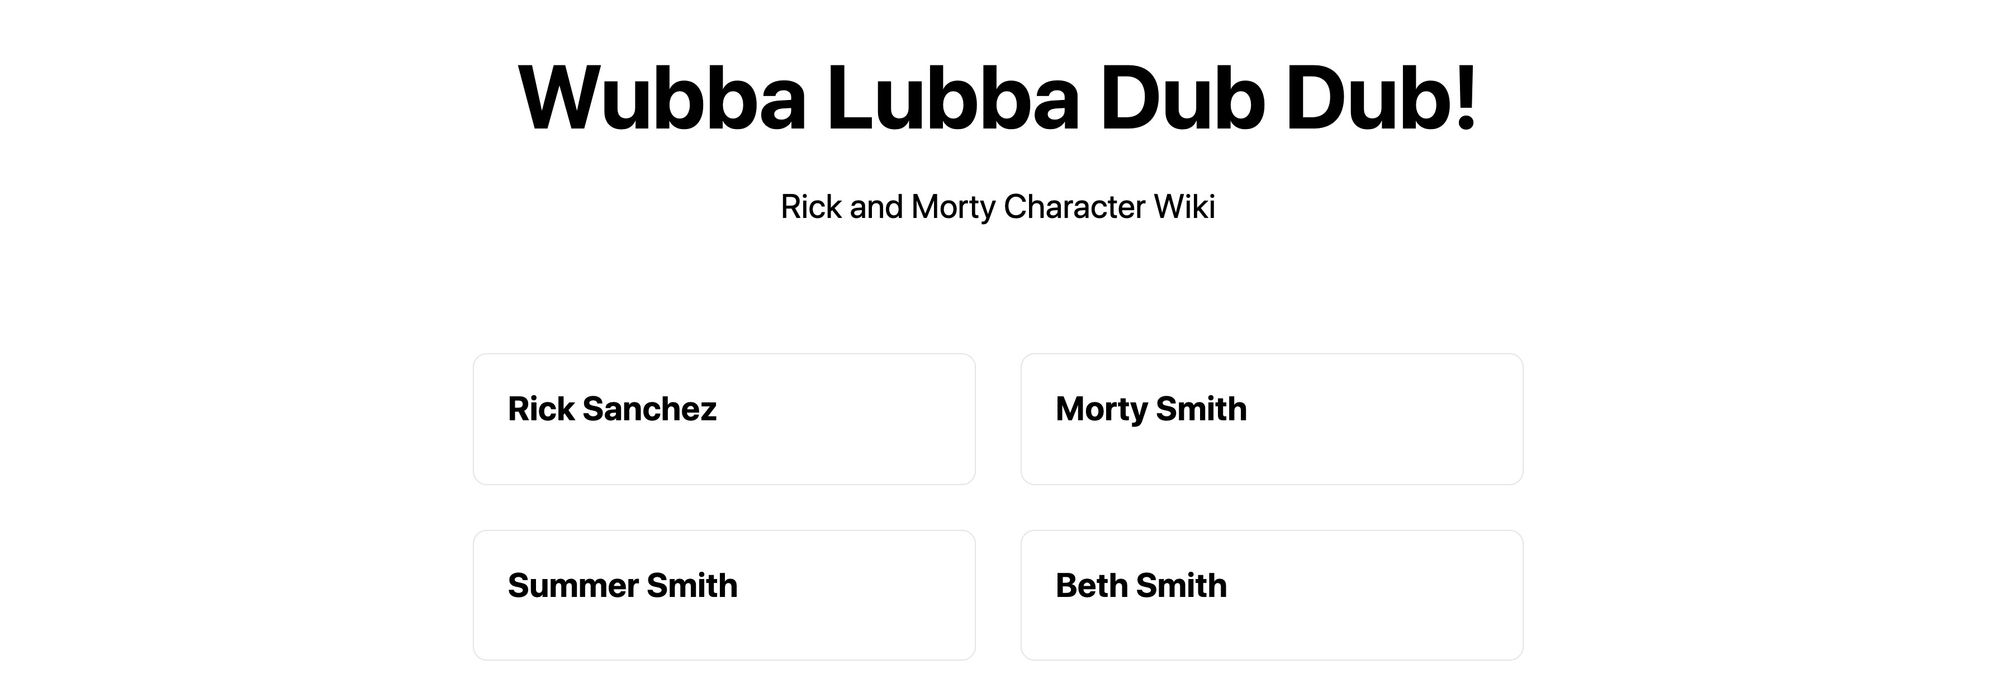 rick-and-morty-wiki-with-character-names